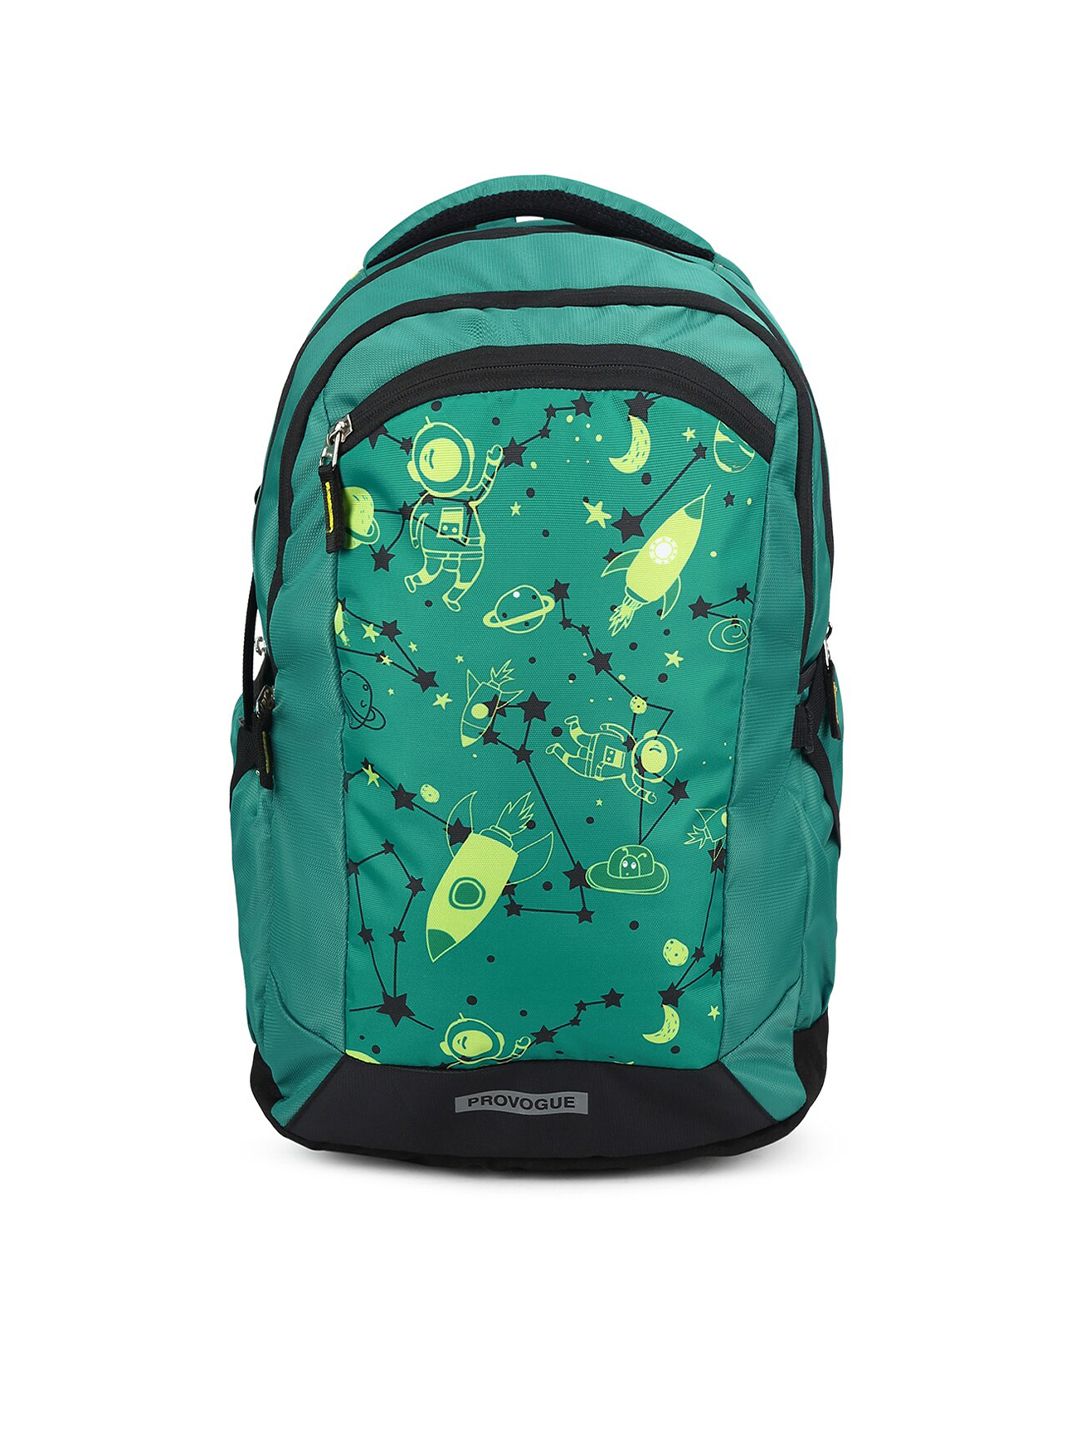 Provogue Unisex Green & Black Backpack with Rain Cover Price in India